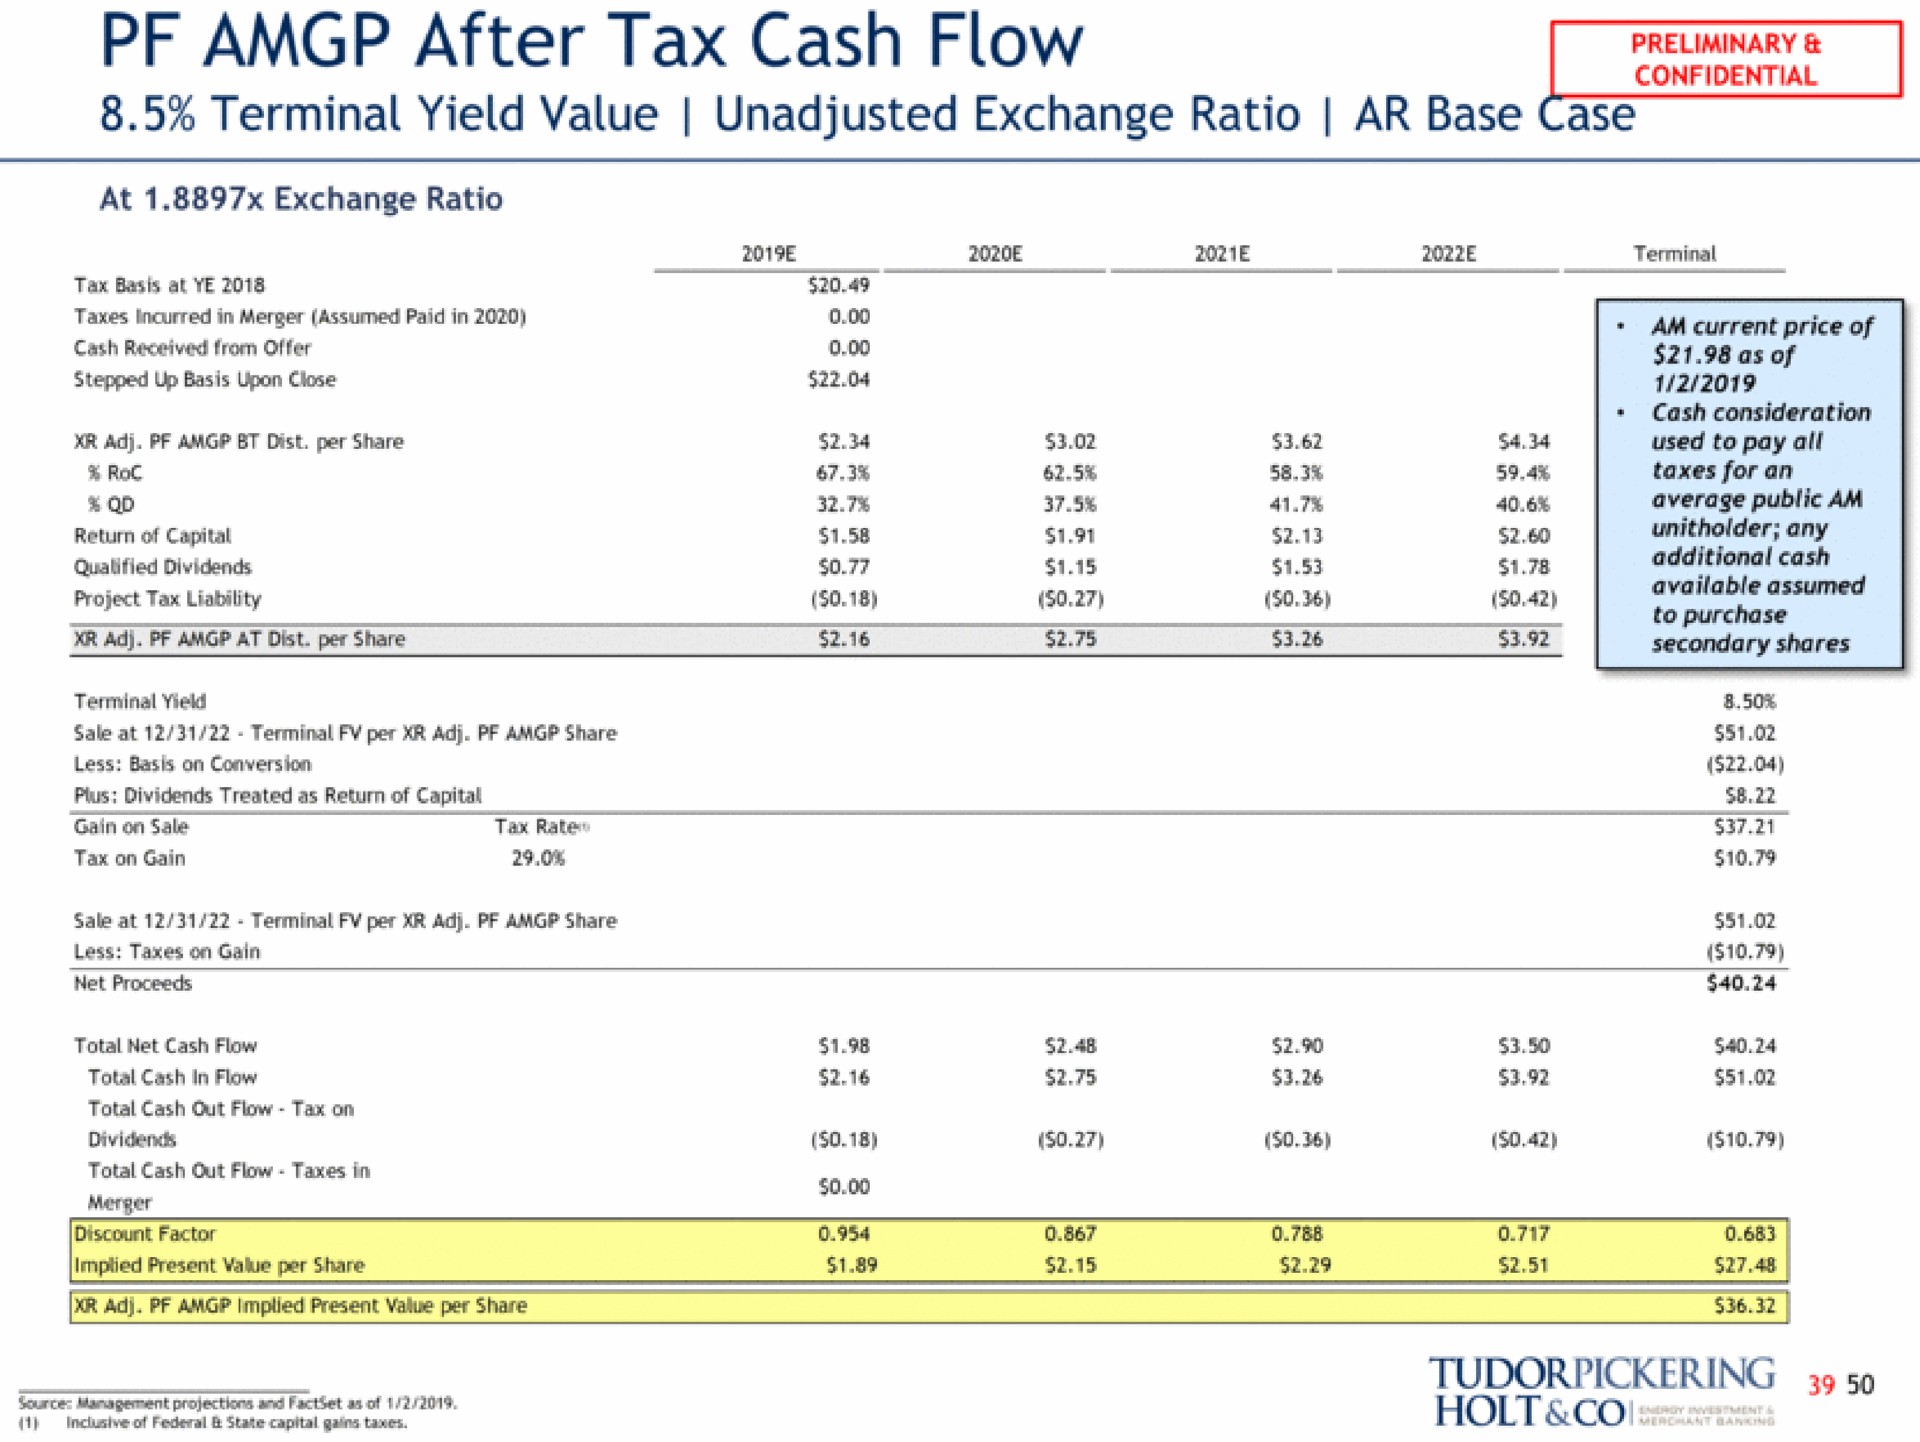 after tax cash flow terminal yield value unadjusted exchange ratio base case state capital gaits holt coo | Tudor, Pickering, Holt & Co